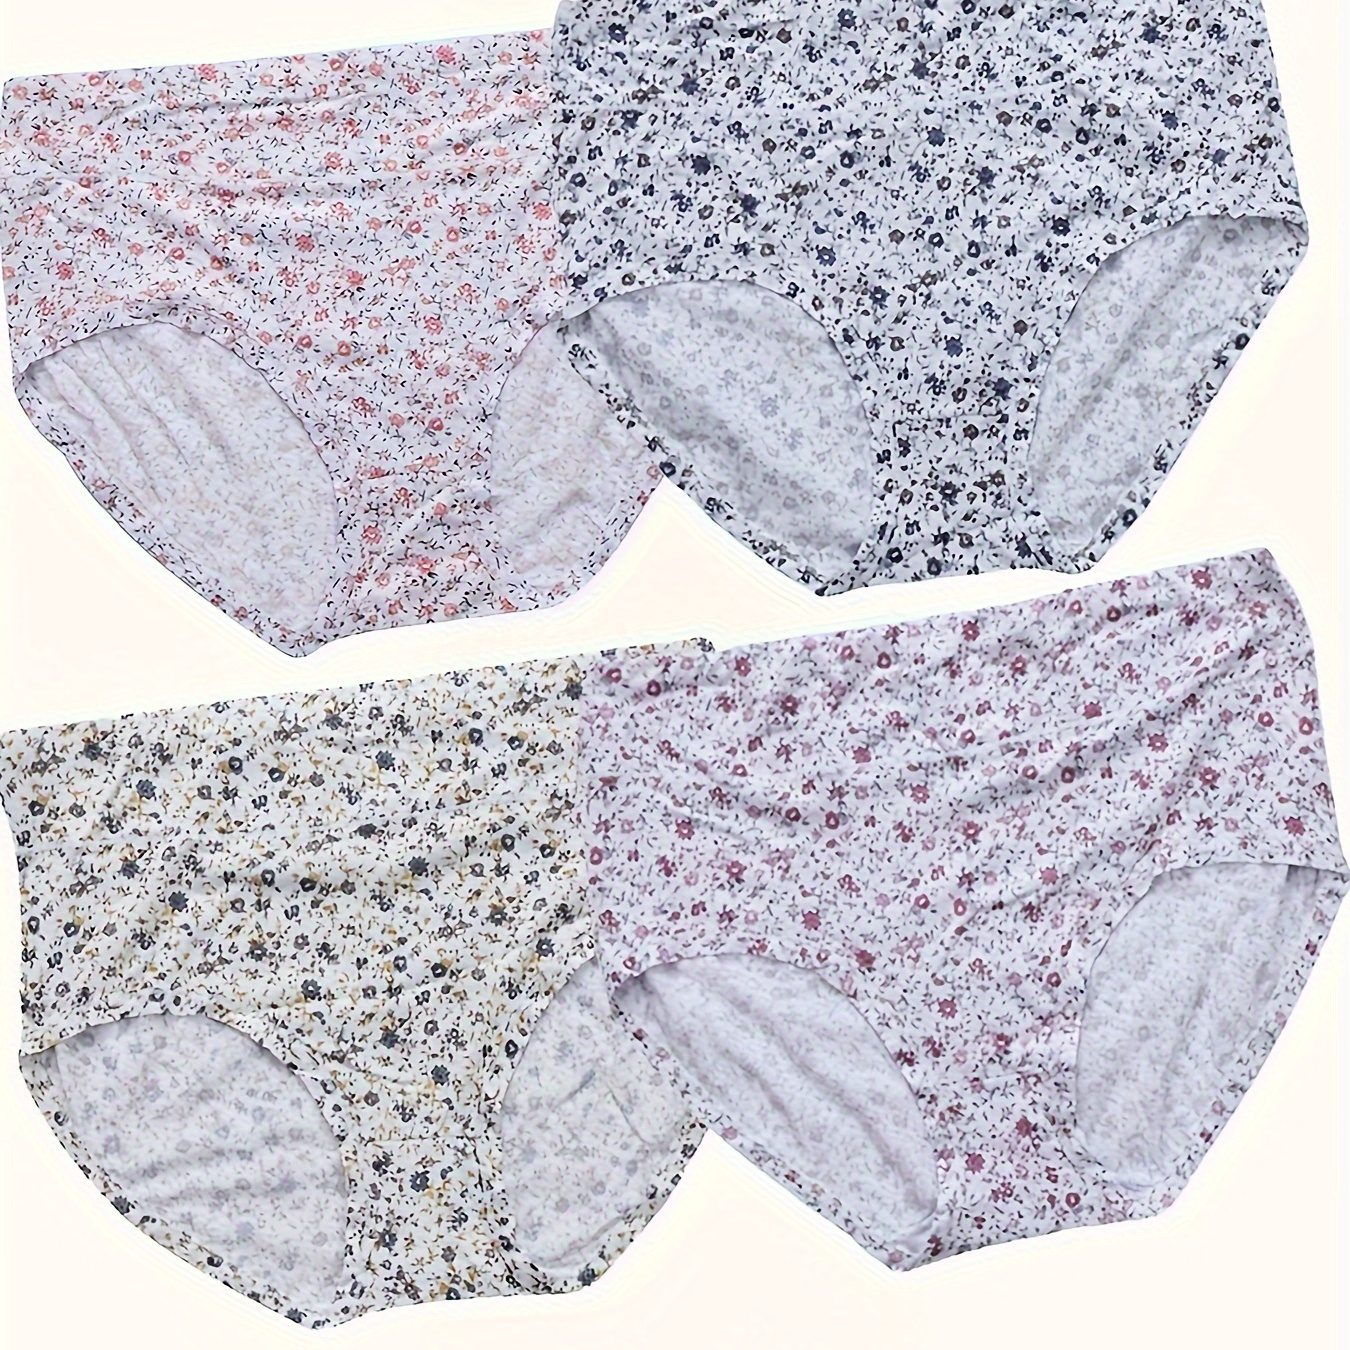 4pcs/set Ditsy Floral Print Underwear For Women, Including High-waisted  Floral Seamless Panty Xl-xxxl Size Range